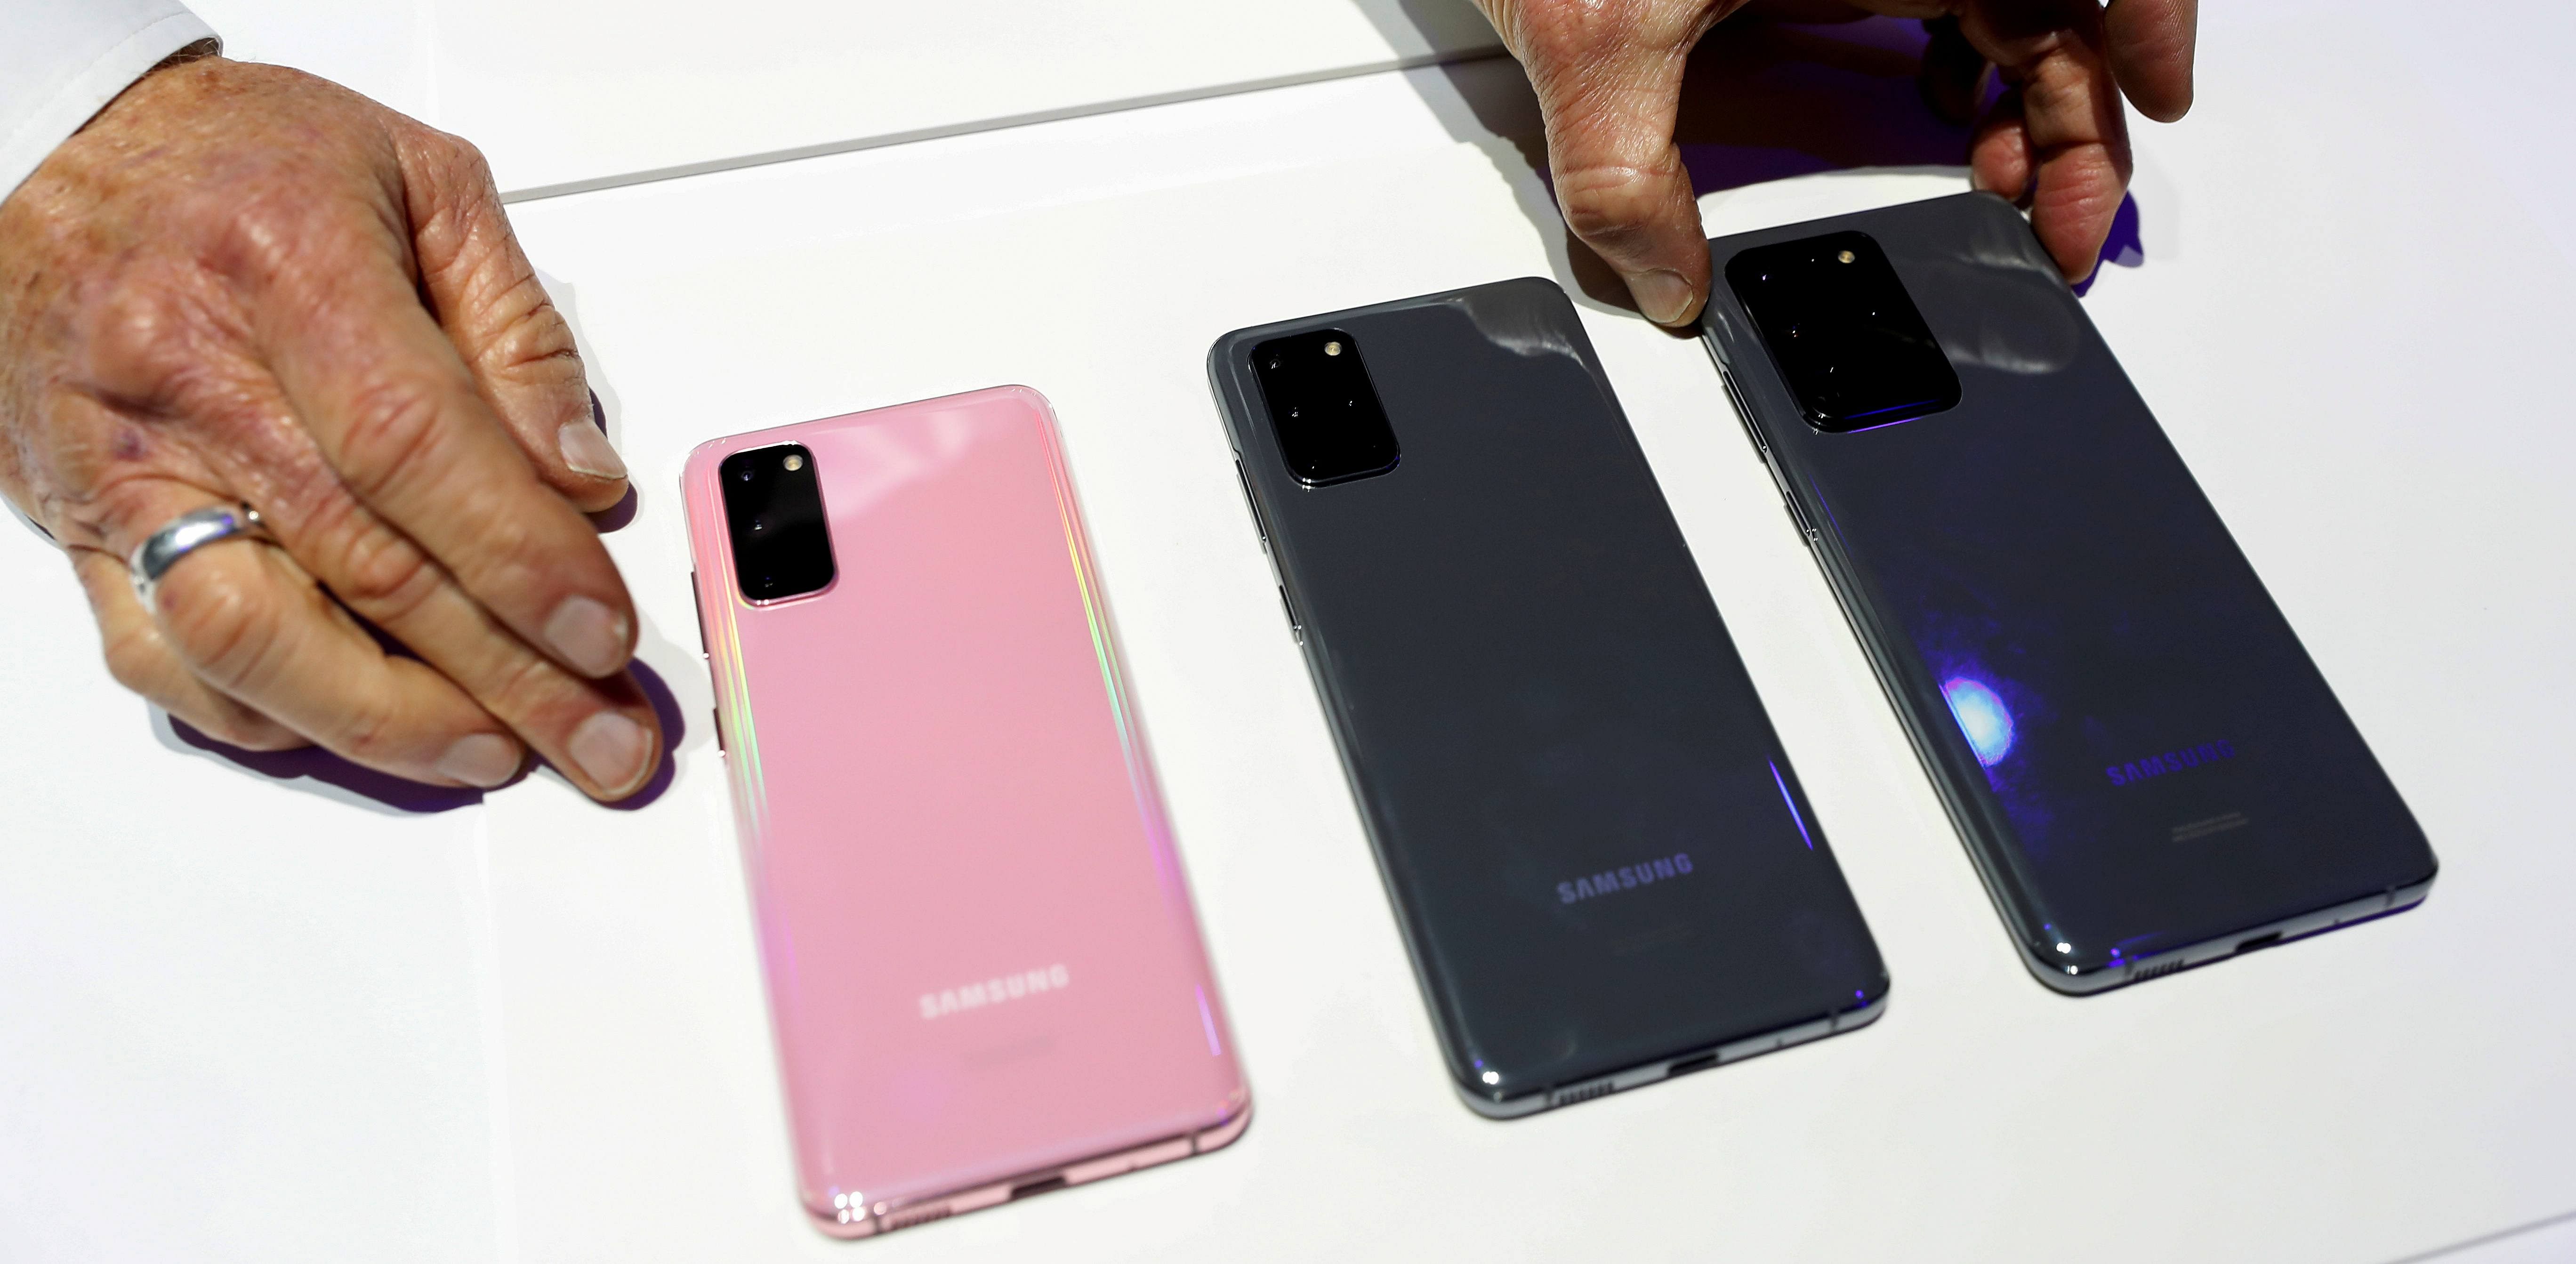 (L-R) The Samsung Galaxy S20, S20+ and S20 Ultra 5G smartphones are seen during Samsung Galaxy Unpacked 2020 in San Francisco, California. Credit: Reuters